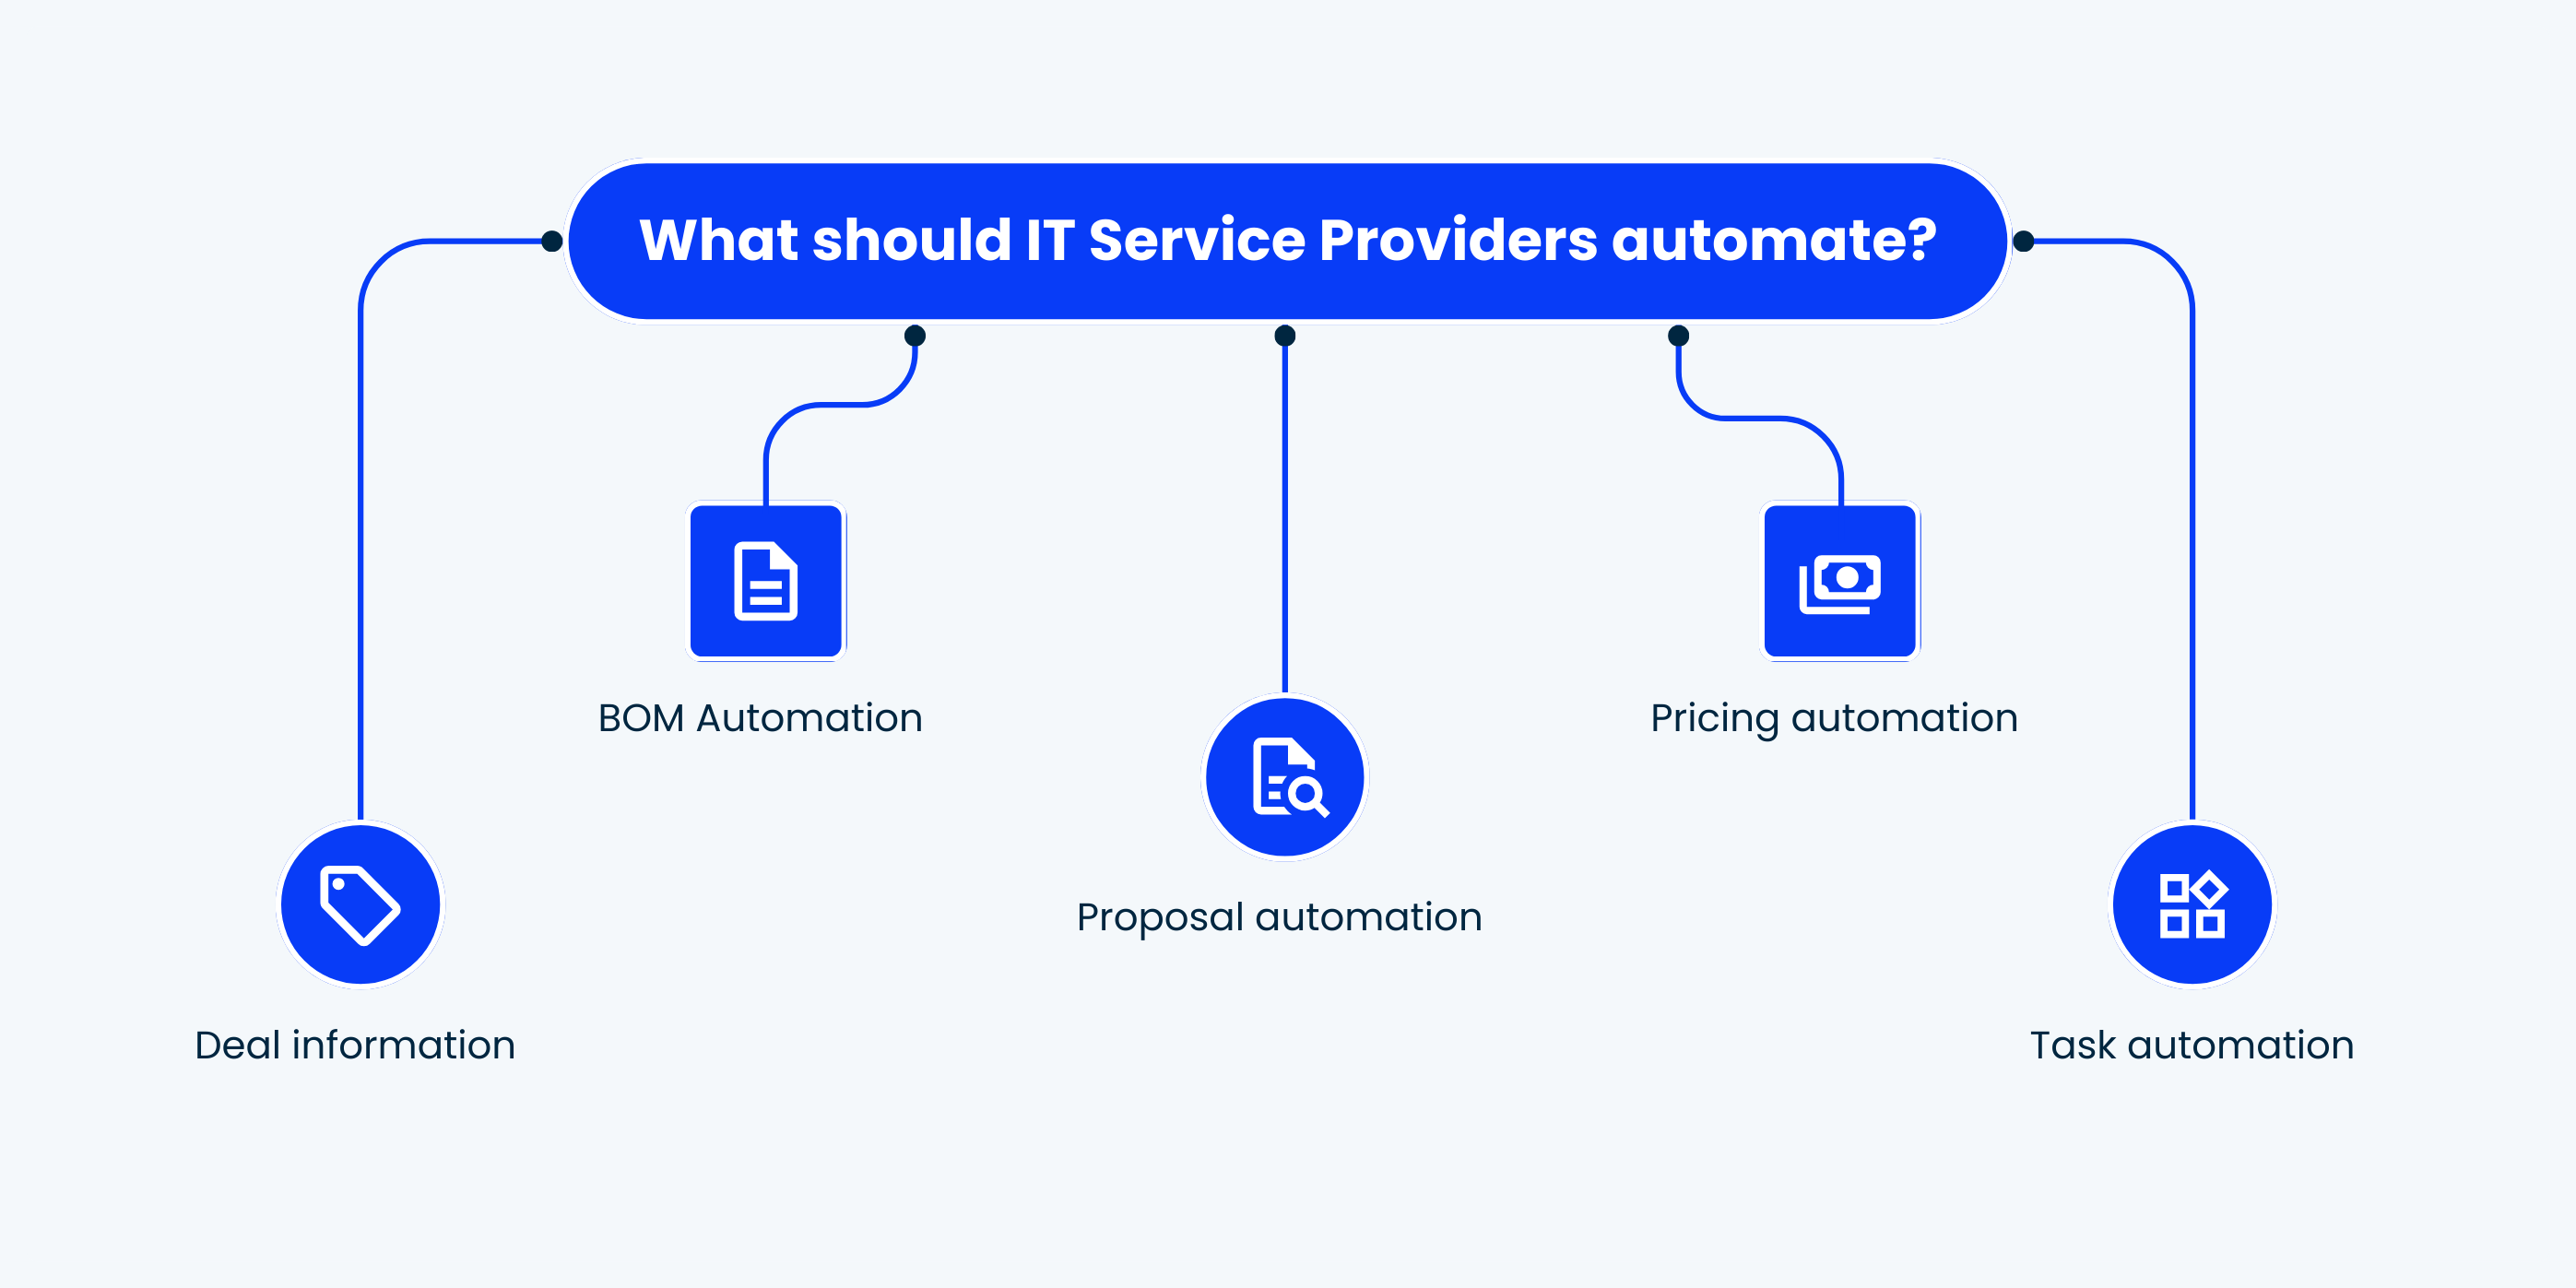 What should IT Service Providers automate